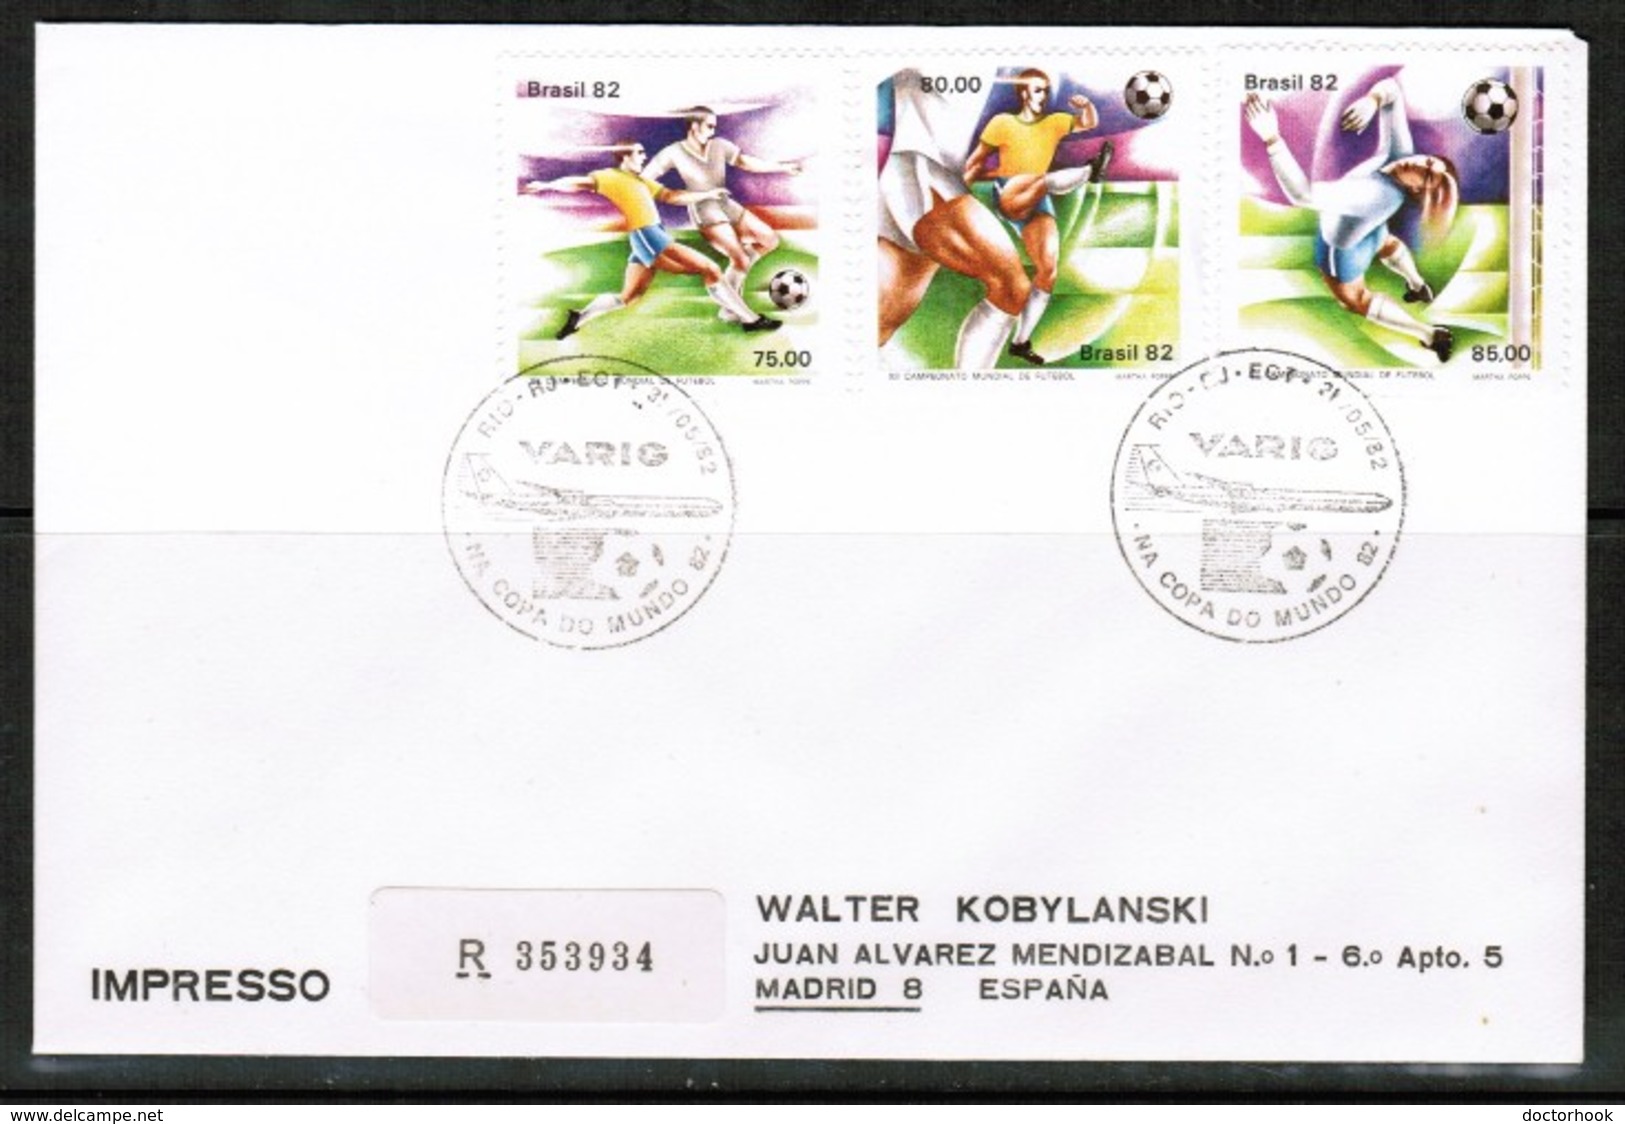 BRAZIL   Scott # 1786-9 ON REGISTERED AIRMAIL COVERS---1982 WORLD CUP (OS-492) - Covers & Documents